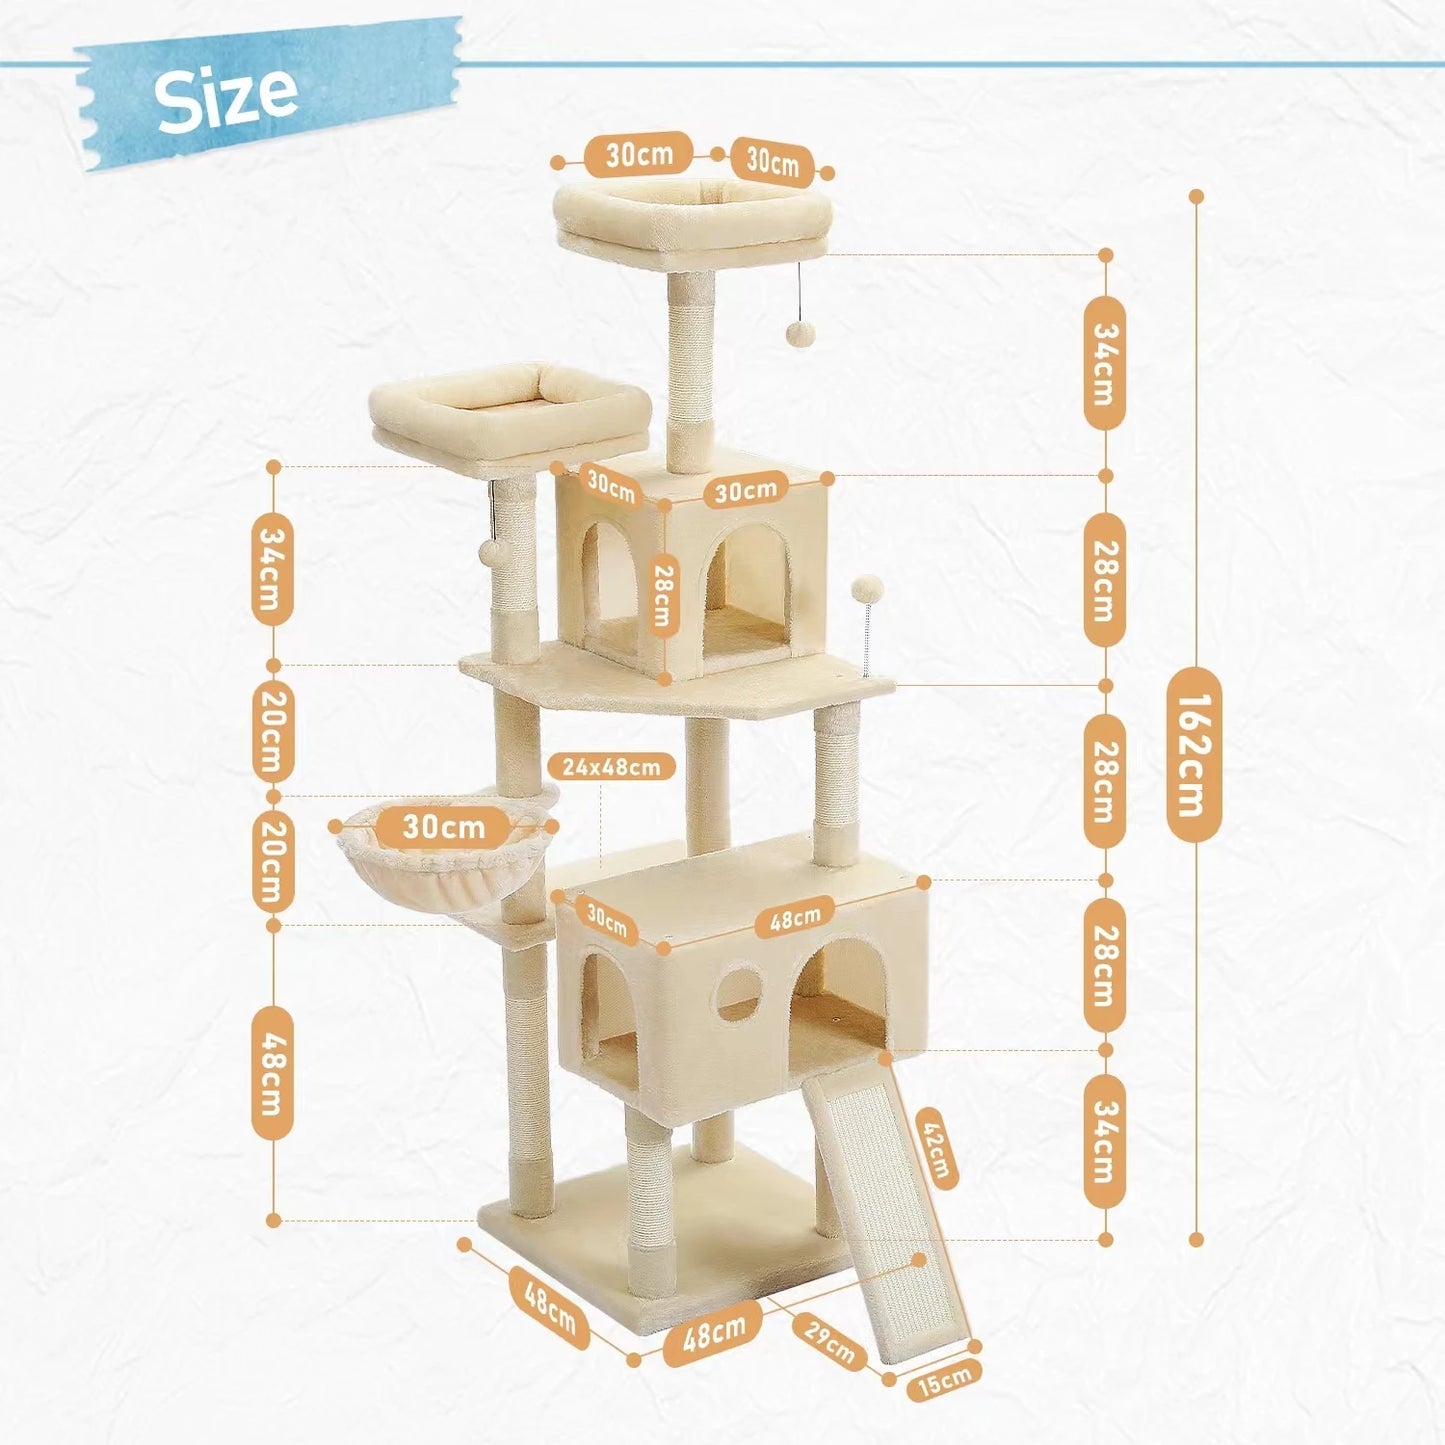 162cm Deluxe Multi-Level Cat Tree with Condo and Scratching Posts